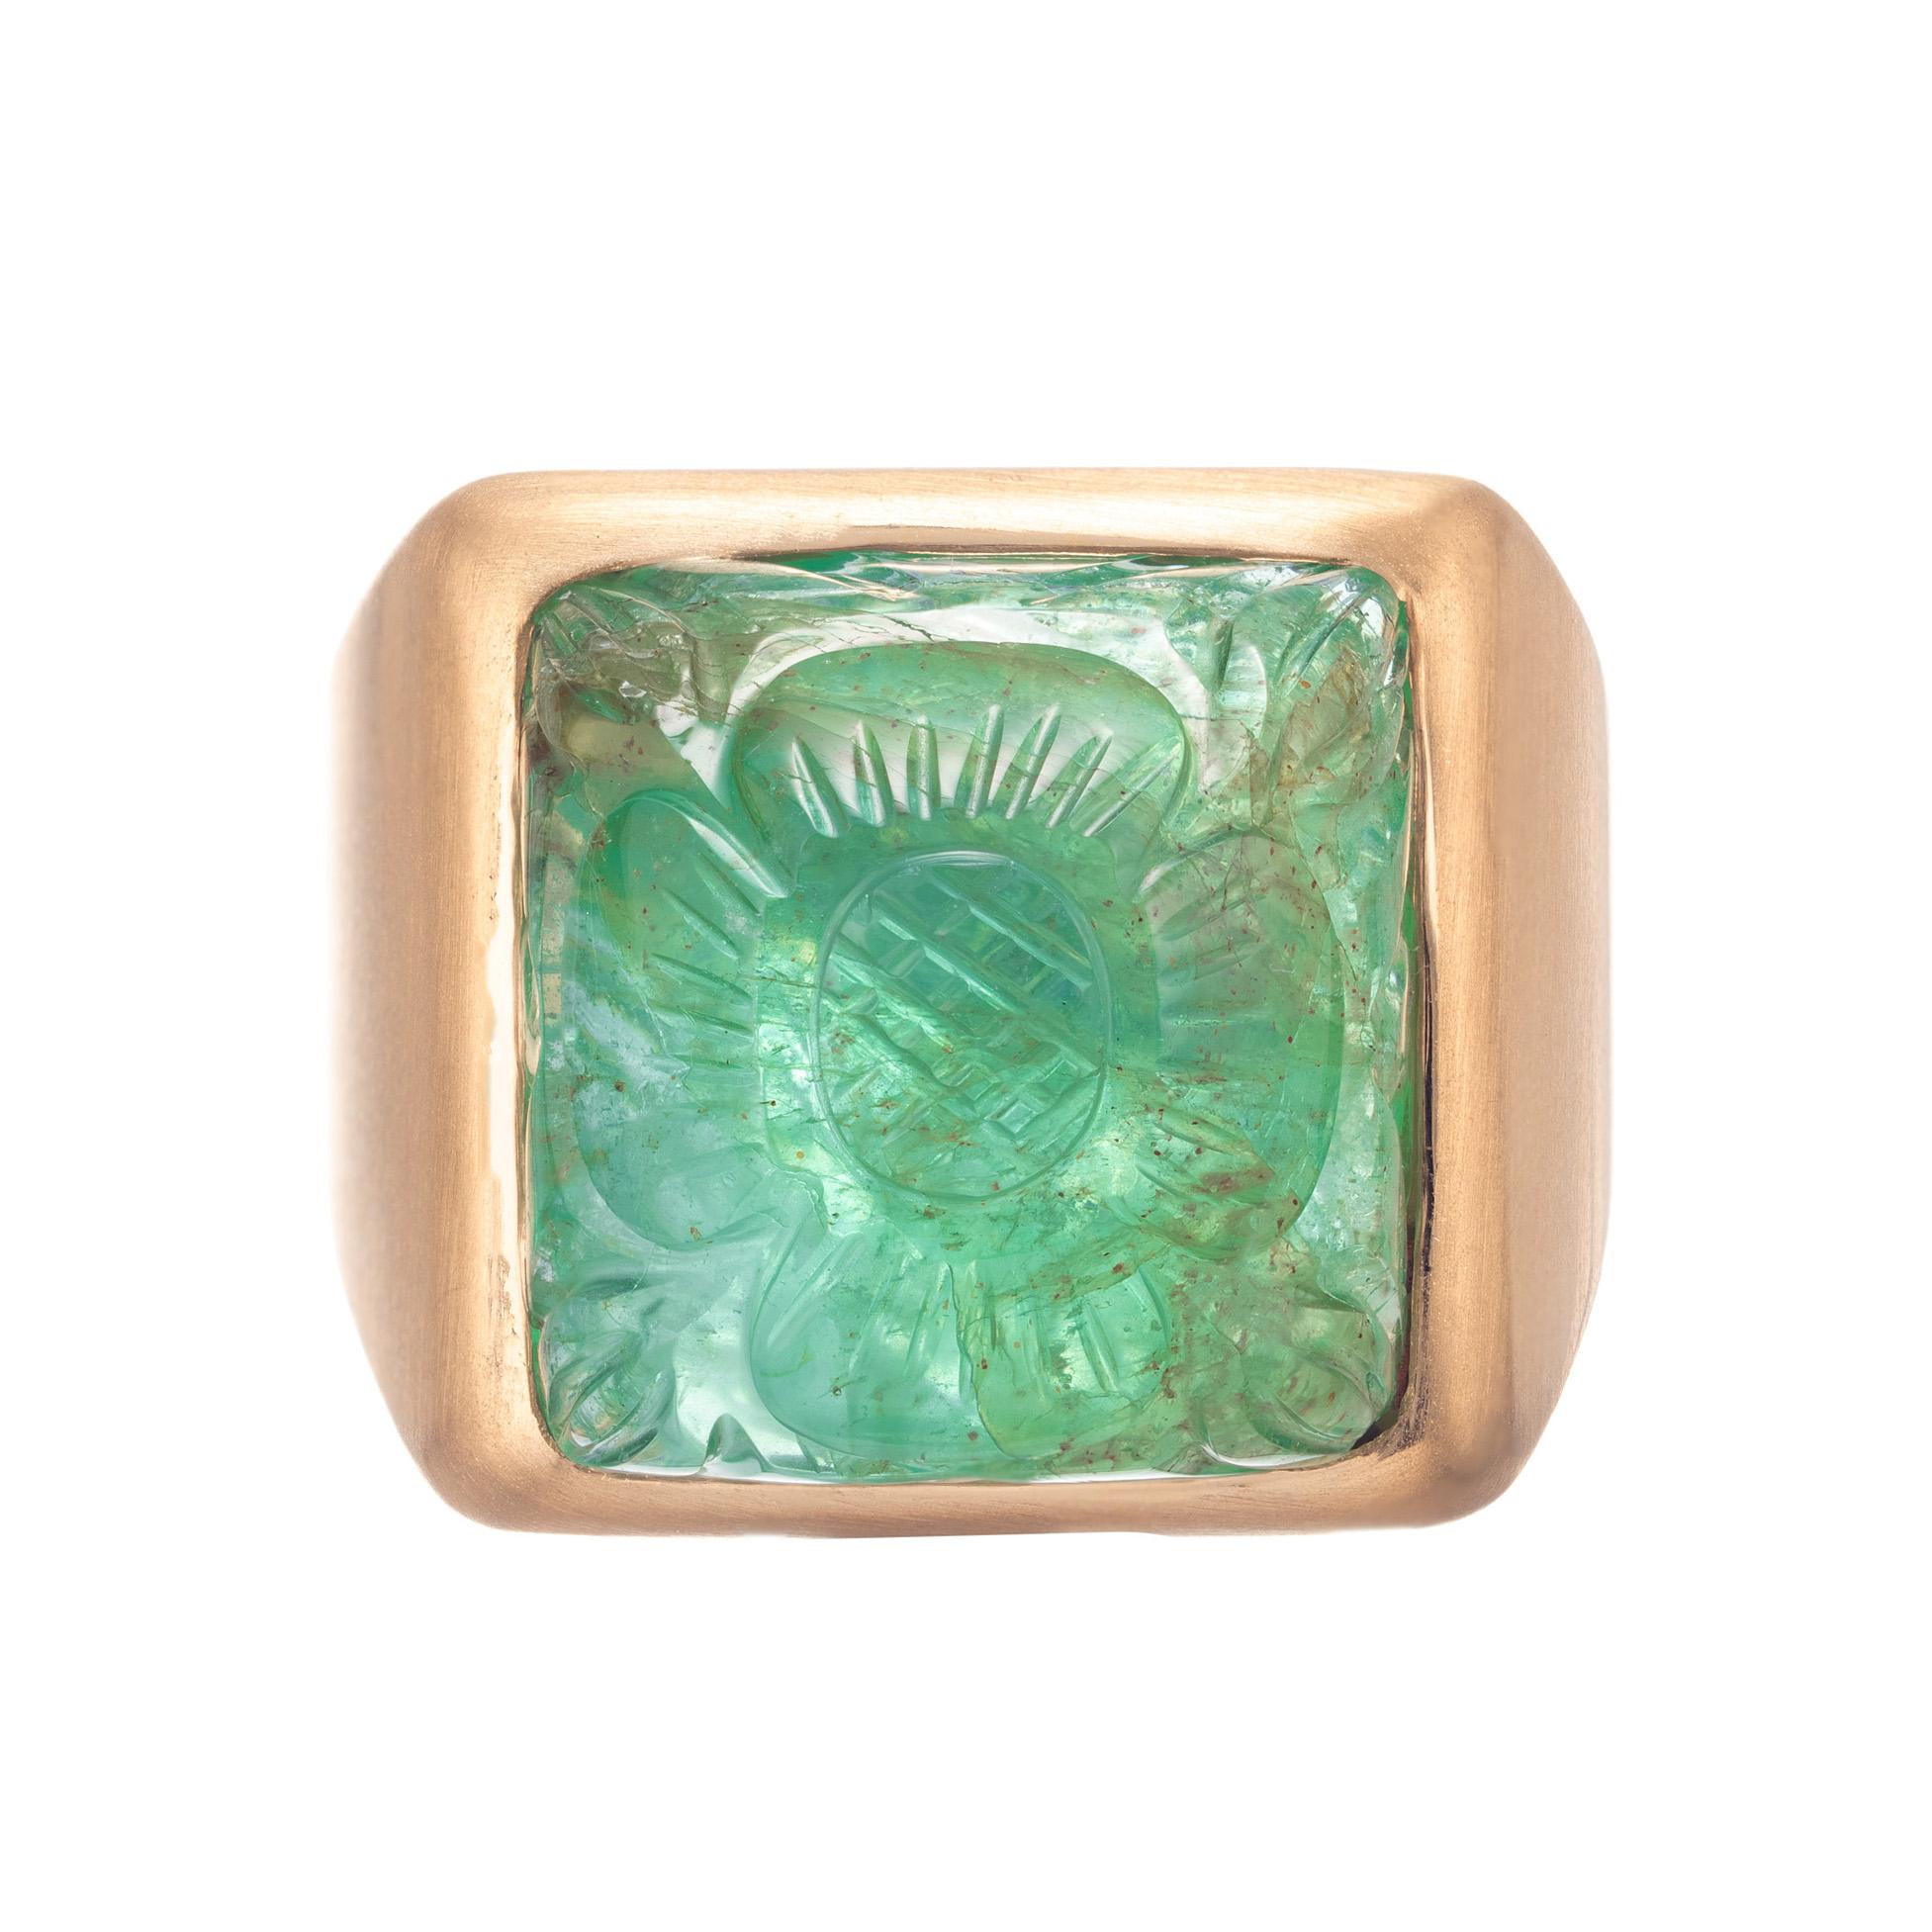 Emerald yellow gold ring. GIA certified natural emerald in a custom brushed dull finish 18k yellow gold ring from the Peter Suchy Workshop designed to show off the emerald

1 square carved green emerald, Approximate 15.92 carats, Gia certificate #